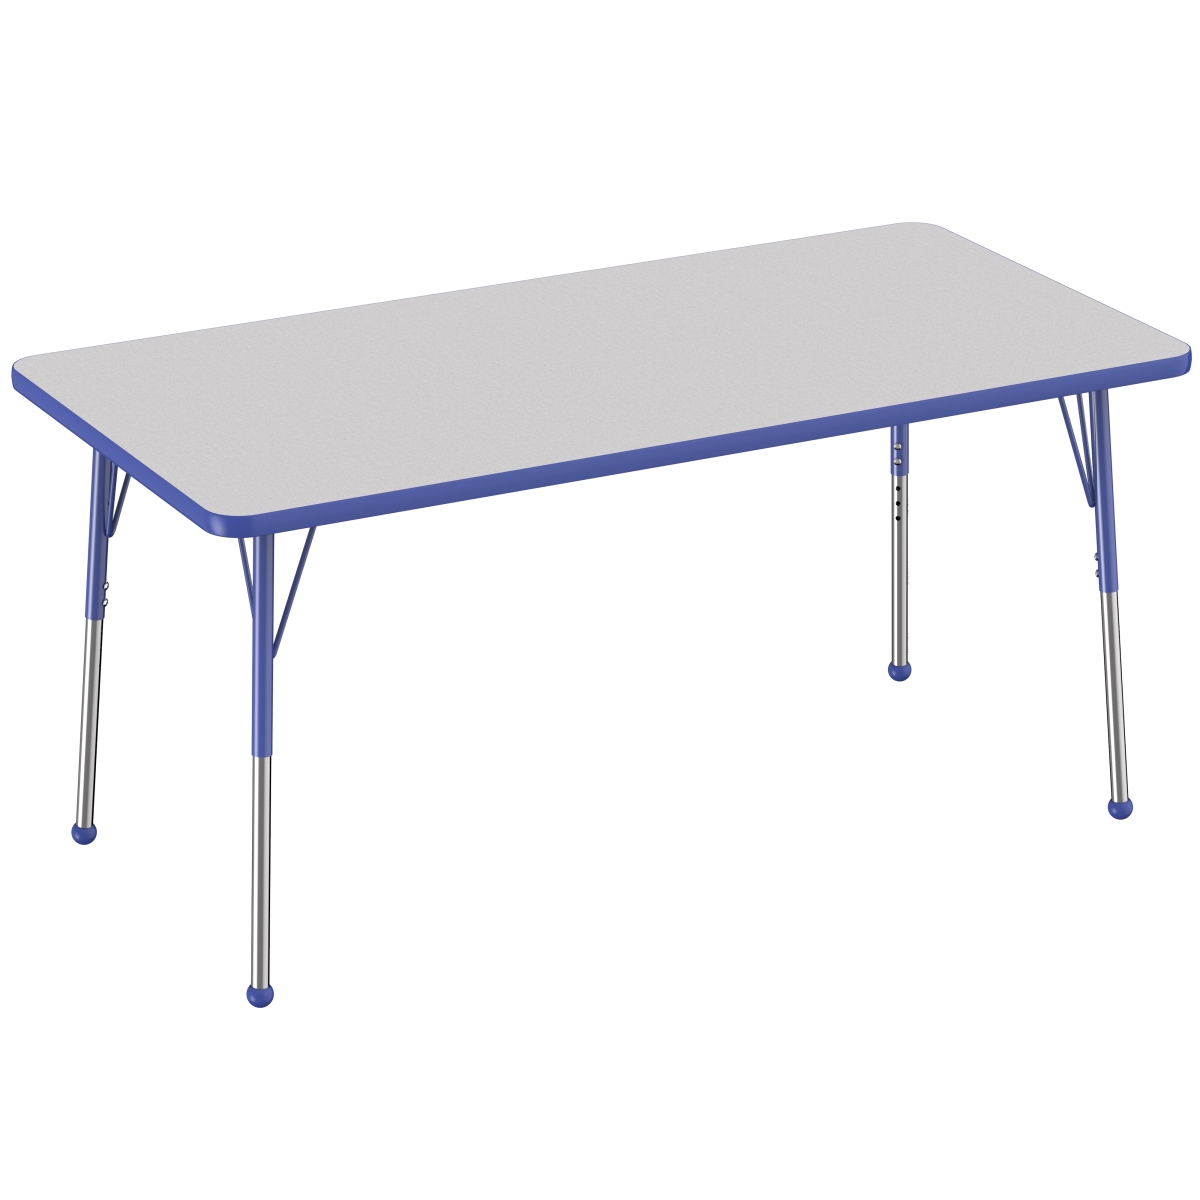 10024-gybl 30 X 60 In. Rectangle T-mold Adjustable Activity Table With Standard Ball - Grey & Blue